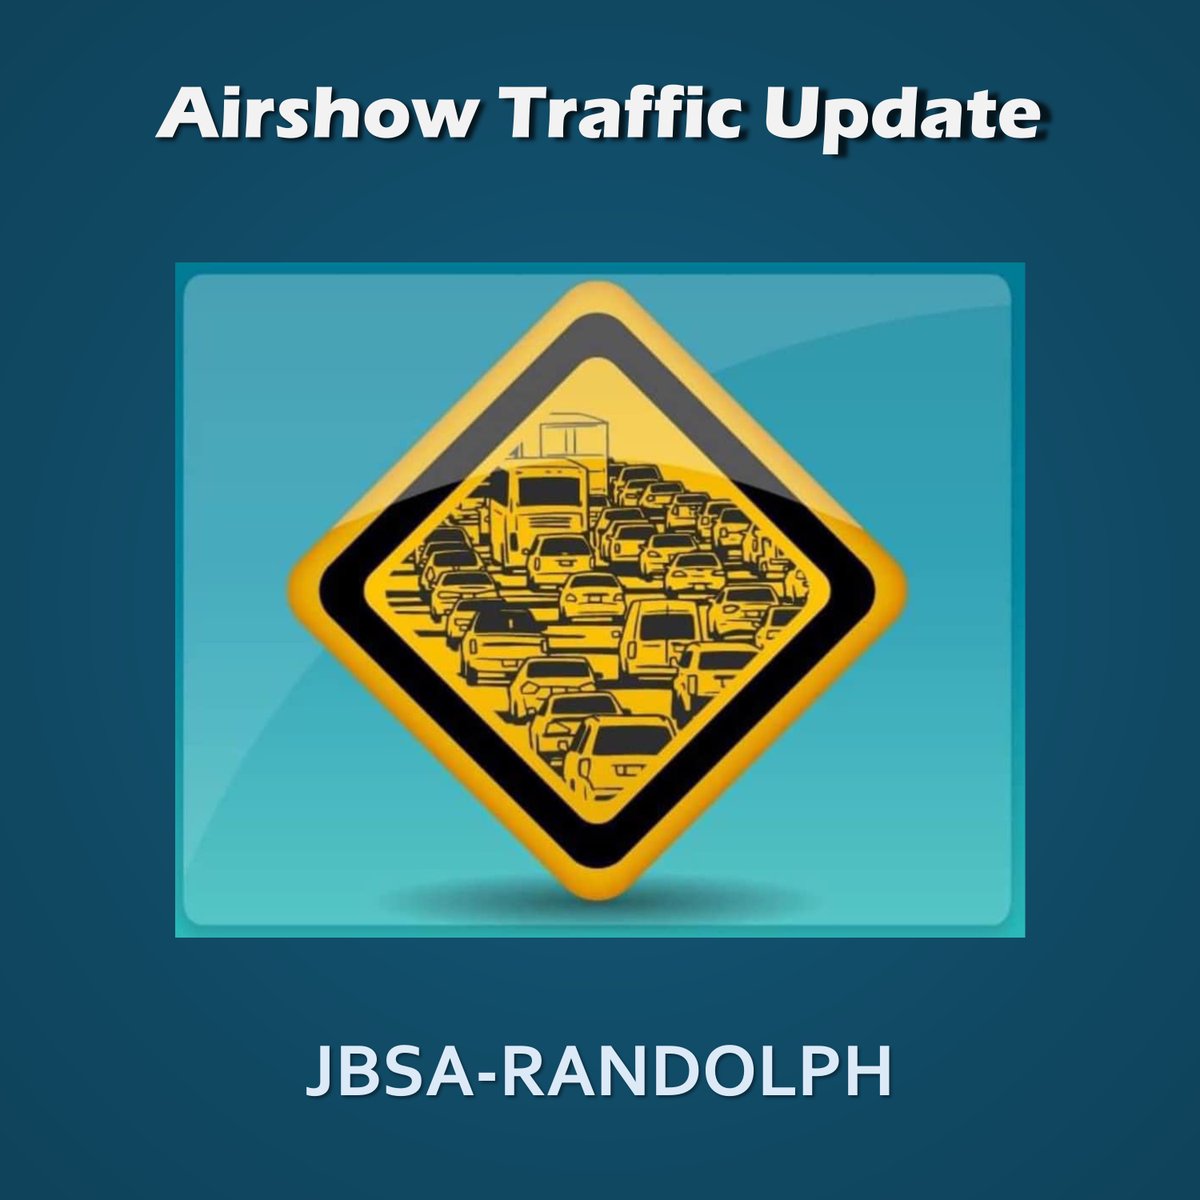 📢 Attention Airshow Attendees! Please note: Main and East Gates are experiencing heavy traffic. For smoother entry, we recommend utilizing the South Gate along Lower Seguin Rd. Thank you for your cooperation! 🚗✈️